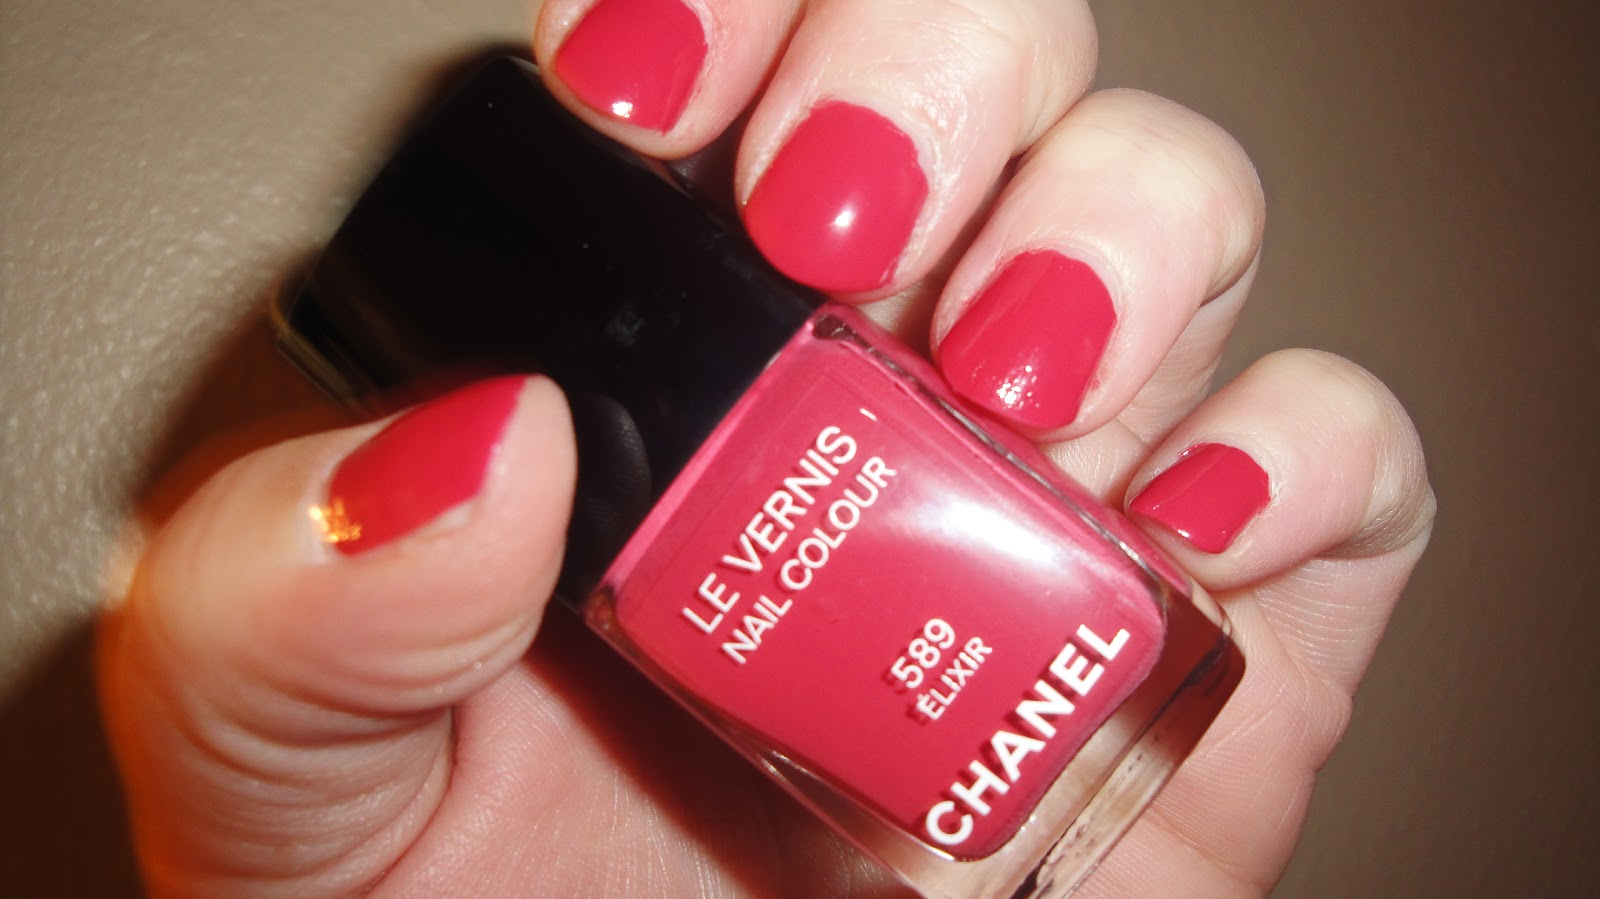 Jayded Dreaming Beauty Blog : 589 ELIXIR CHANEL LE VERNIS COLOUR - SWATCHES AND REVIEW